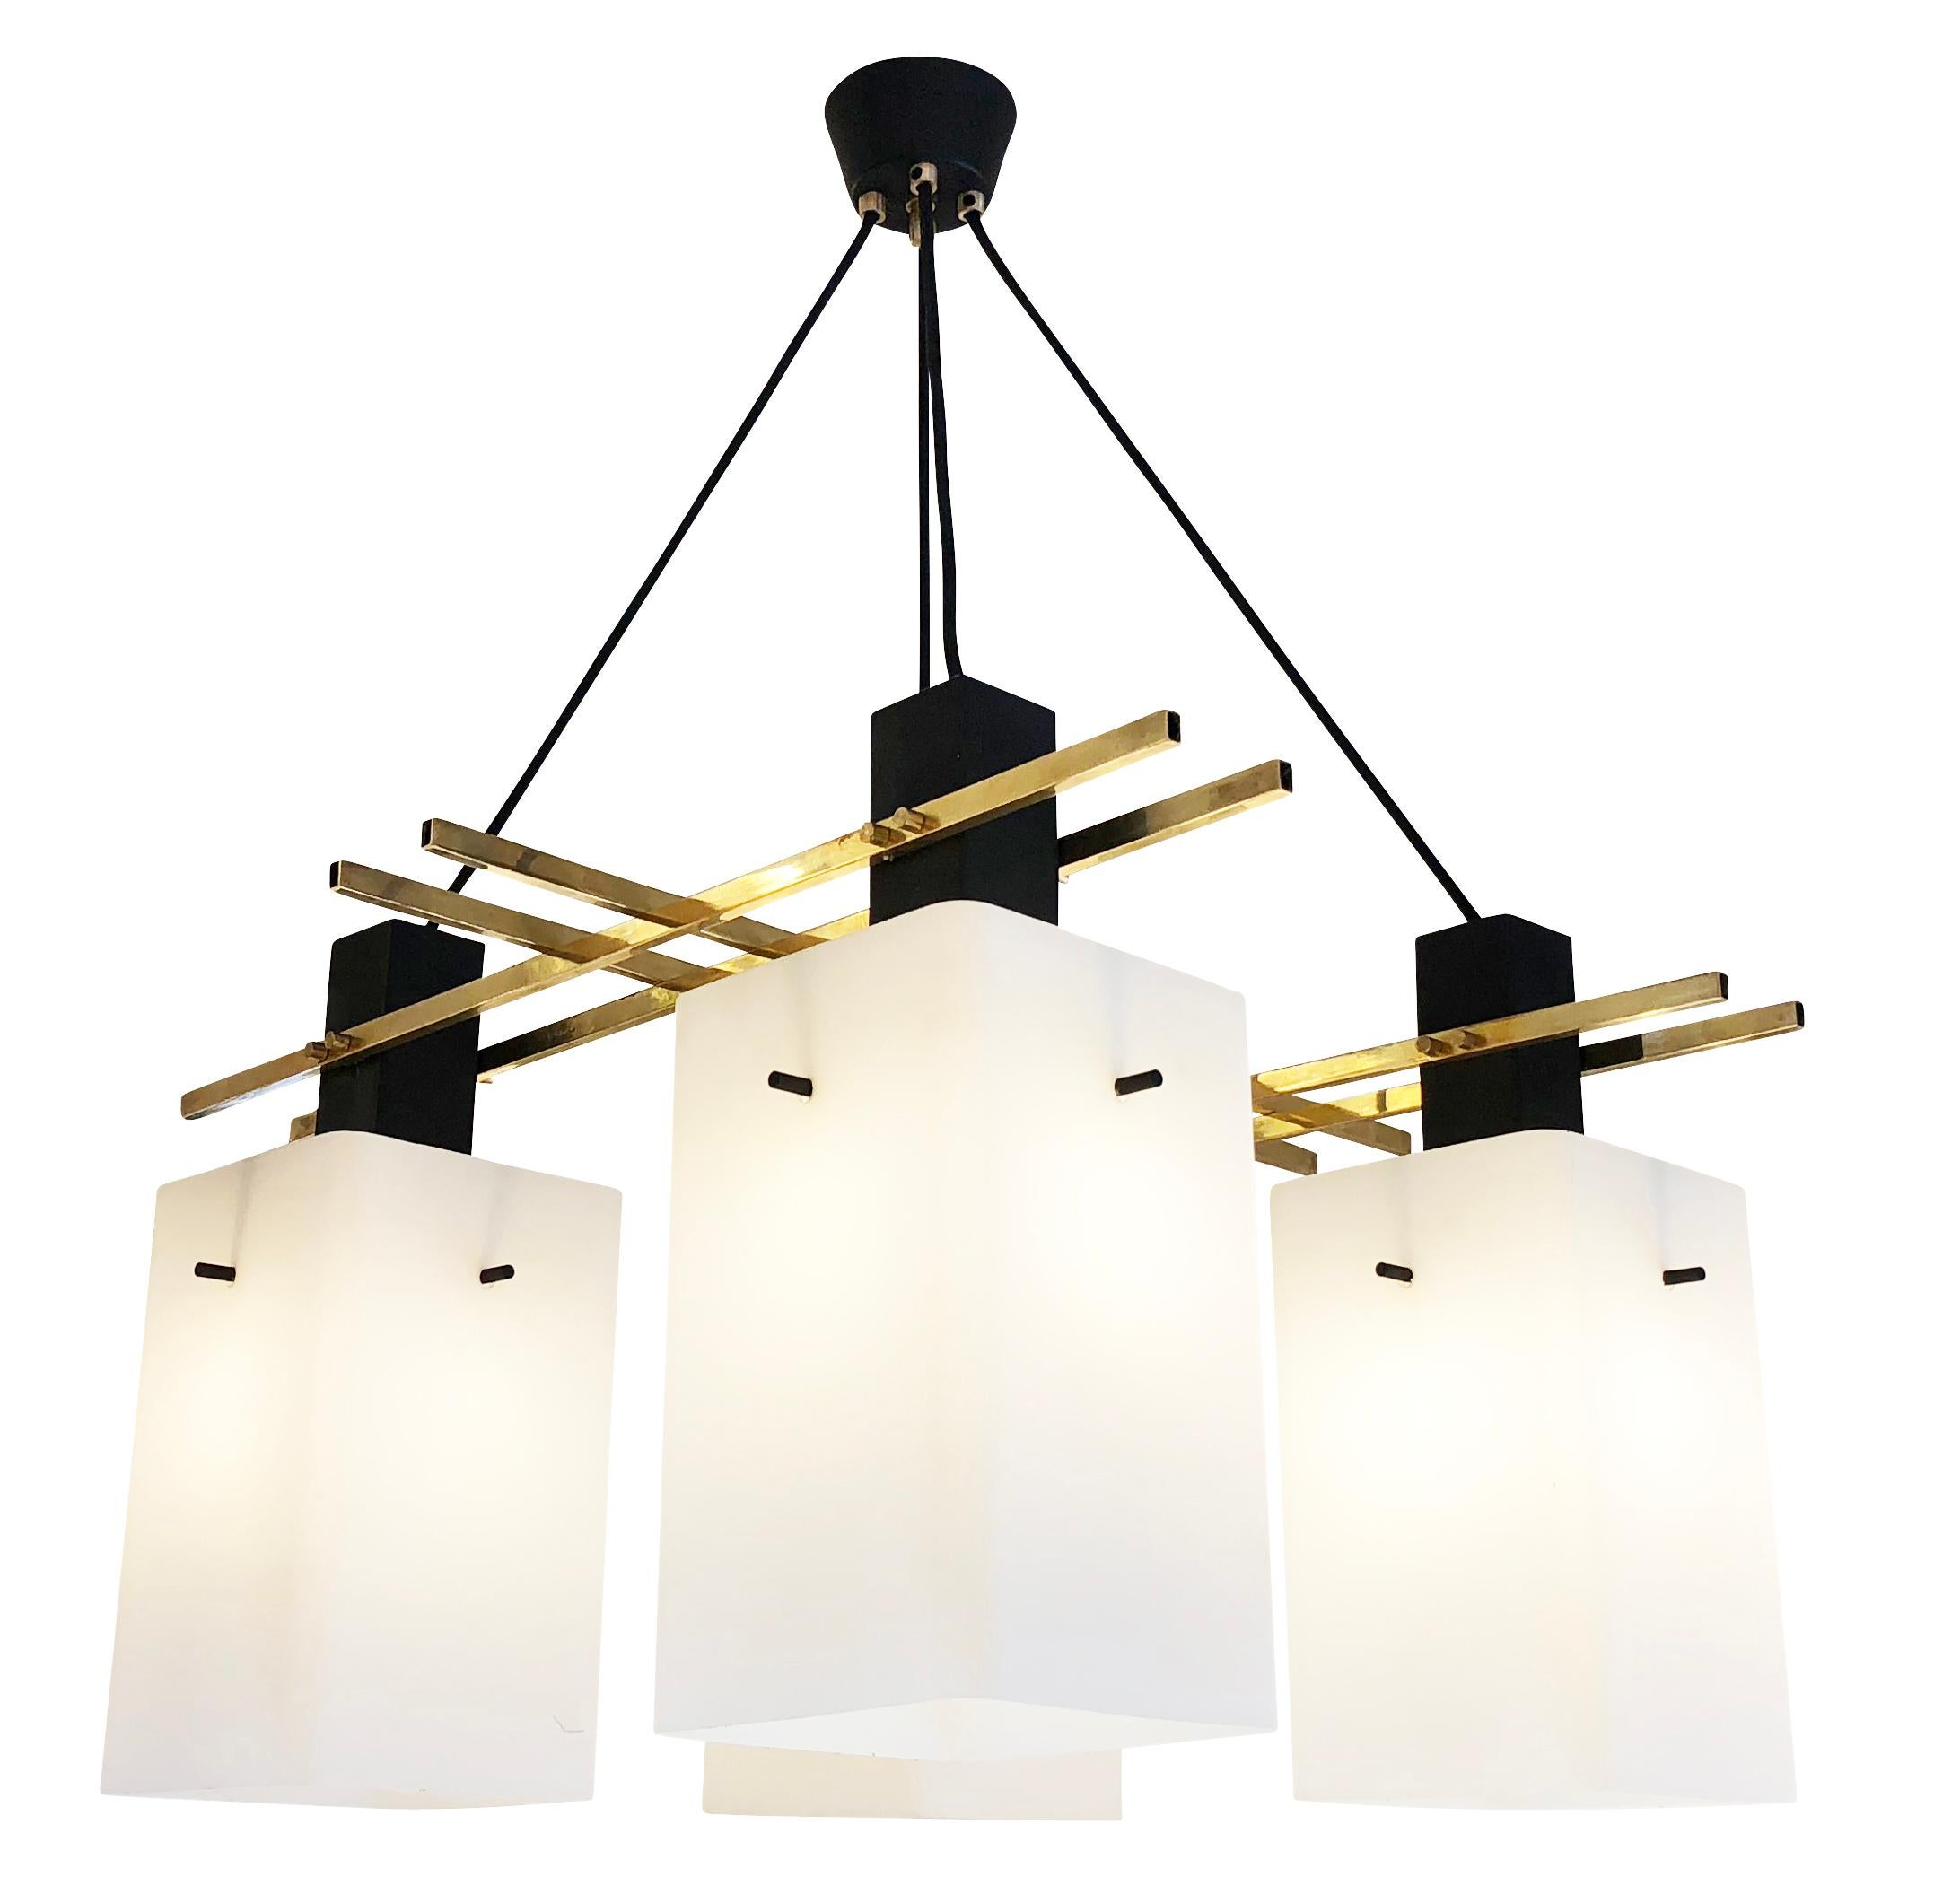 Stilux ceiling light with rectangular frosted glass shades on a brass frame with black lacquered details. Drop can be adjusted via the four fabric cords. Holds four candelabra bulbs.

Condition: Good vintage condition, minor wear consistent with